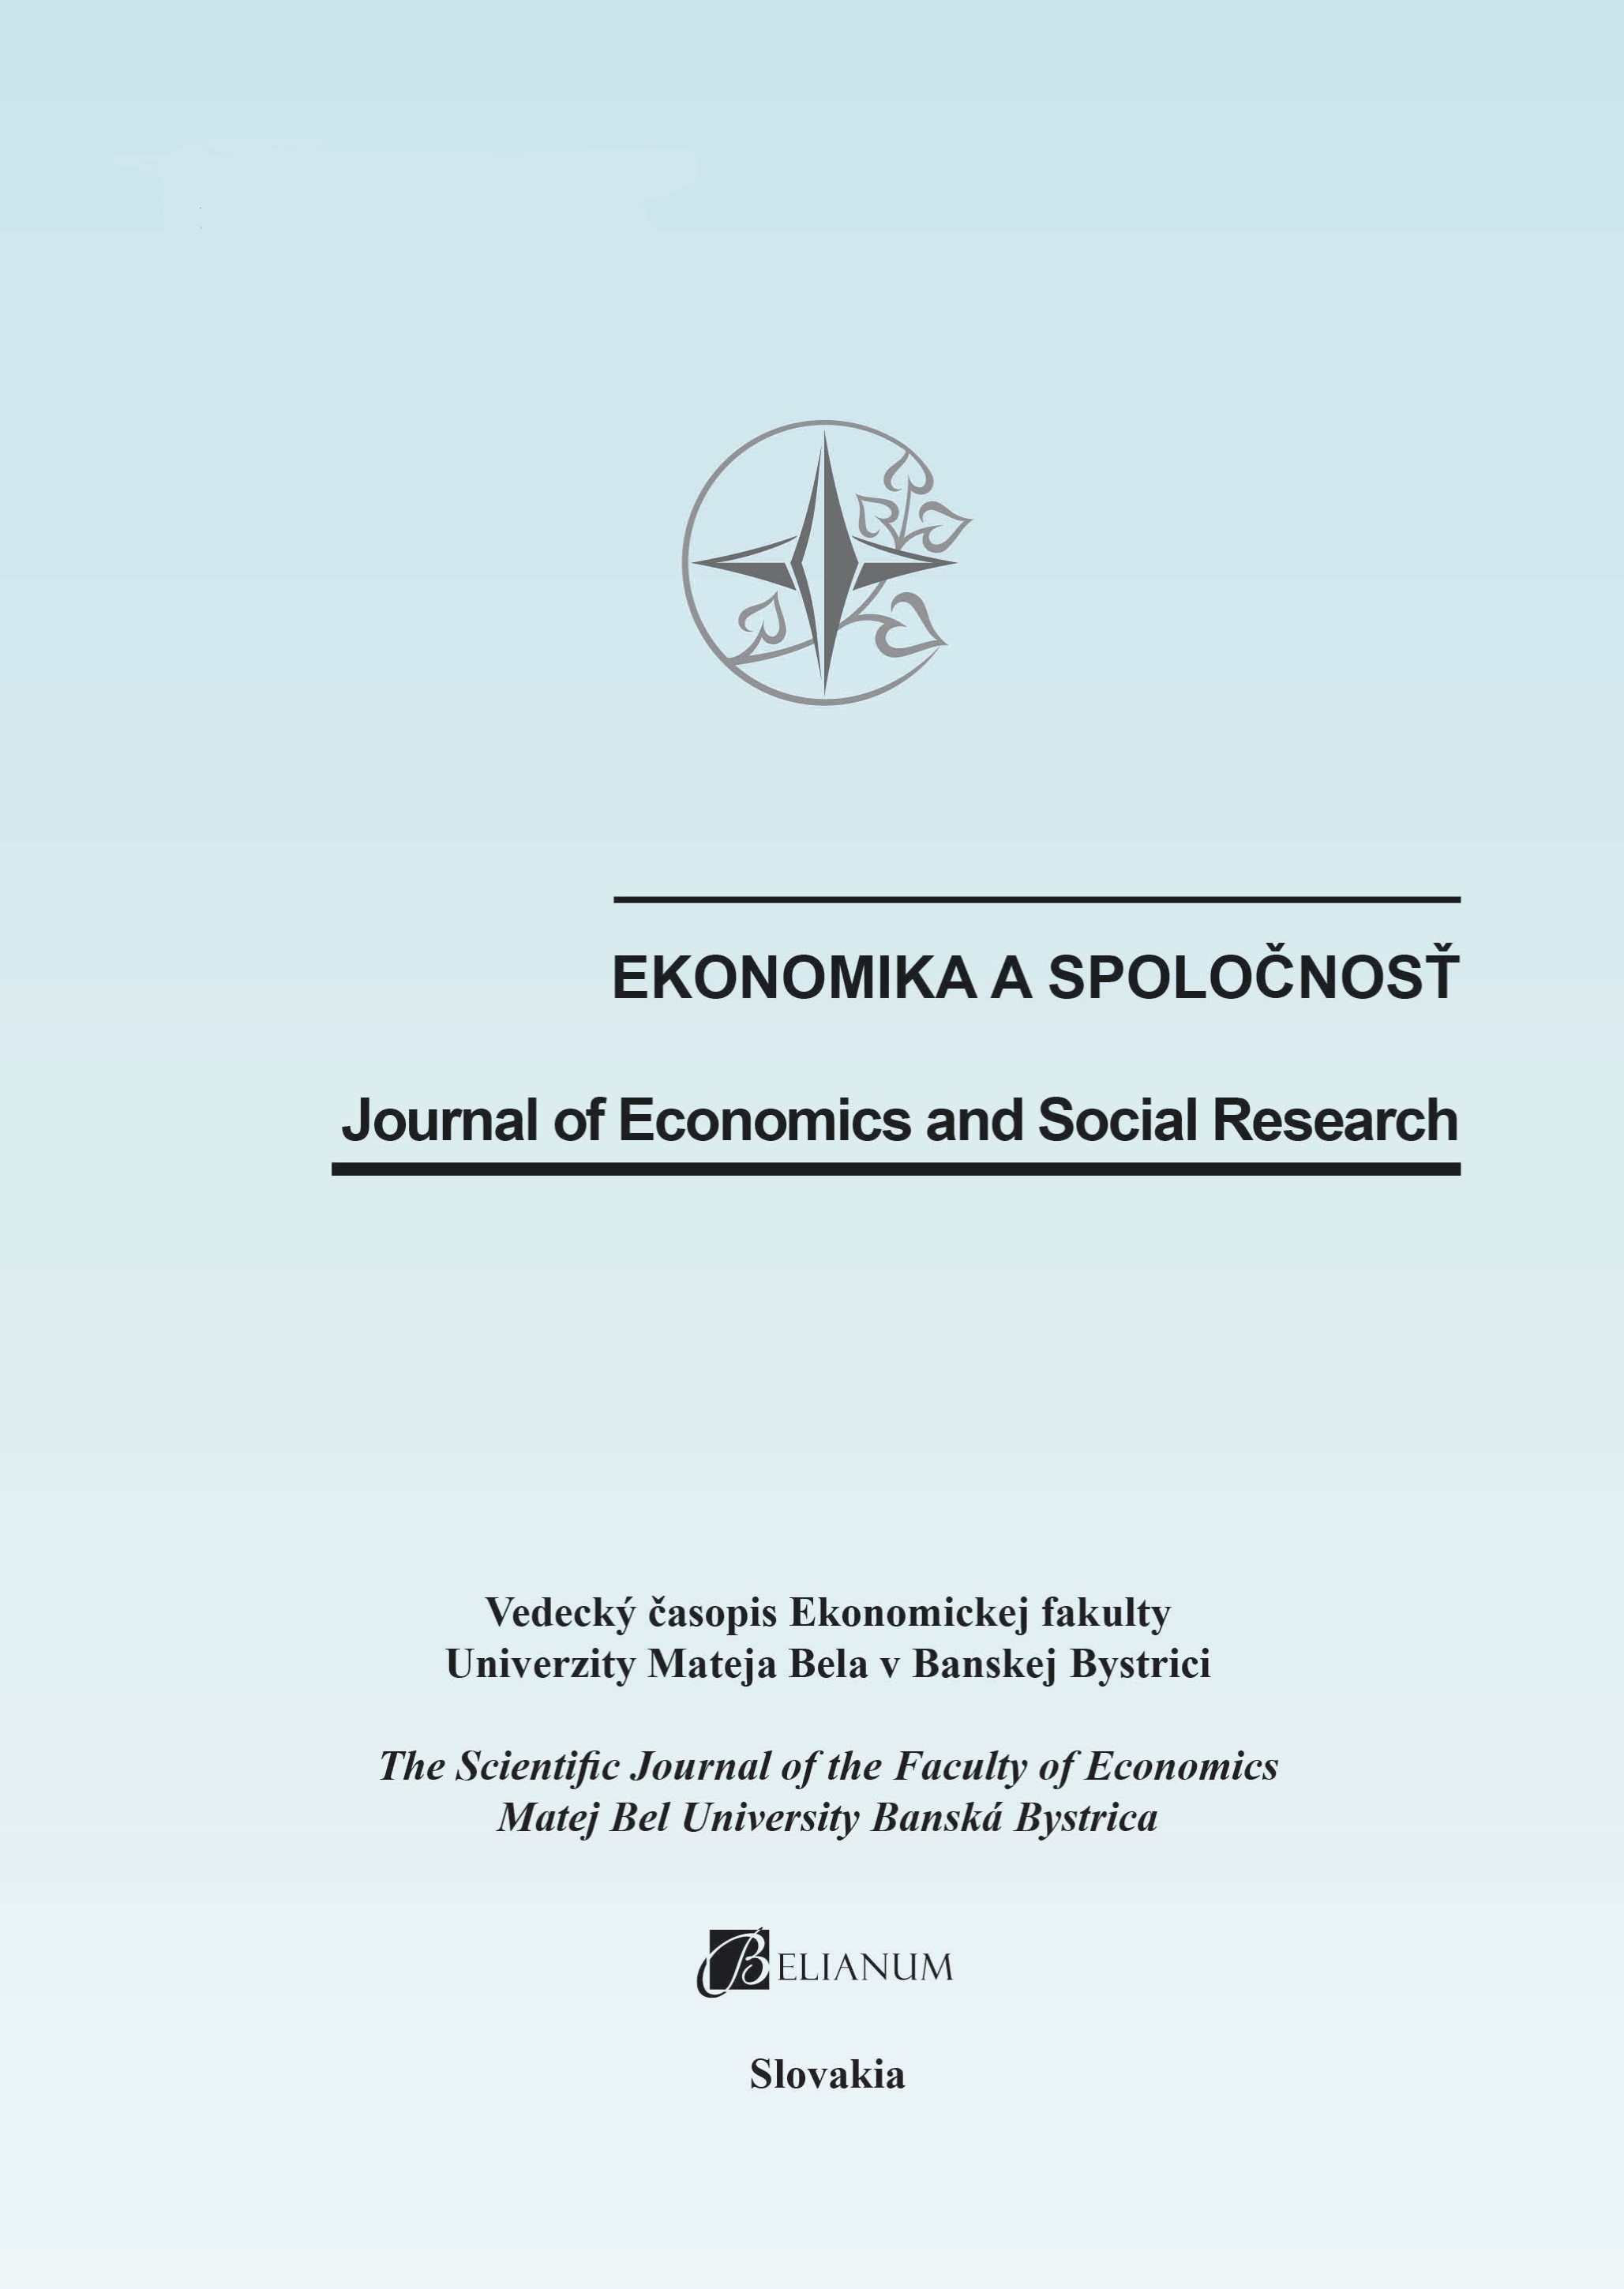 The impact of measures adopted by the Government of the Slovak Republic on the gross domestic product in connection with the COVID-19 pan Cover Image